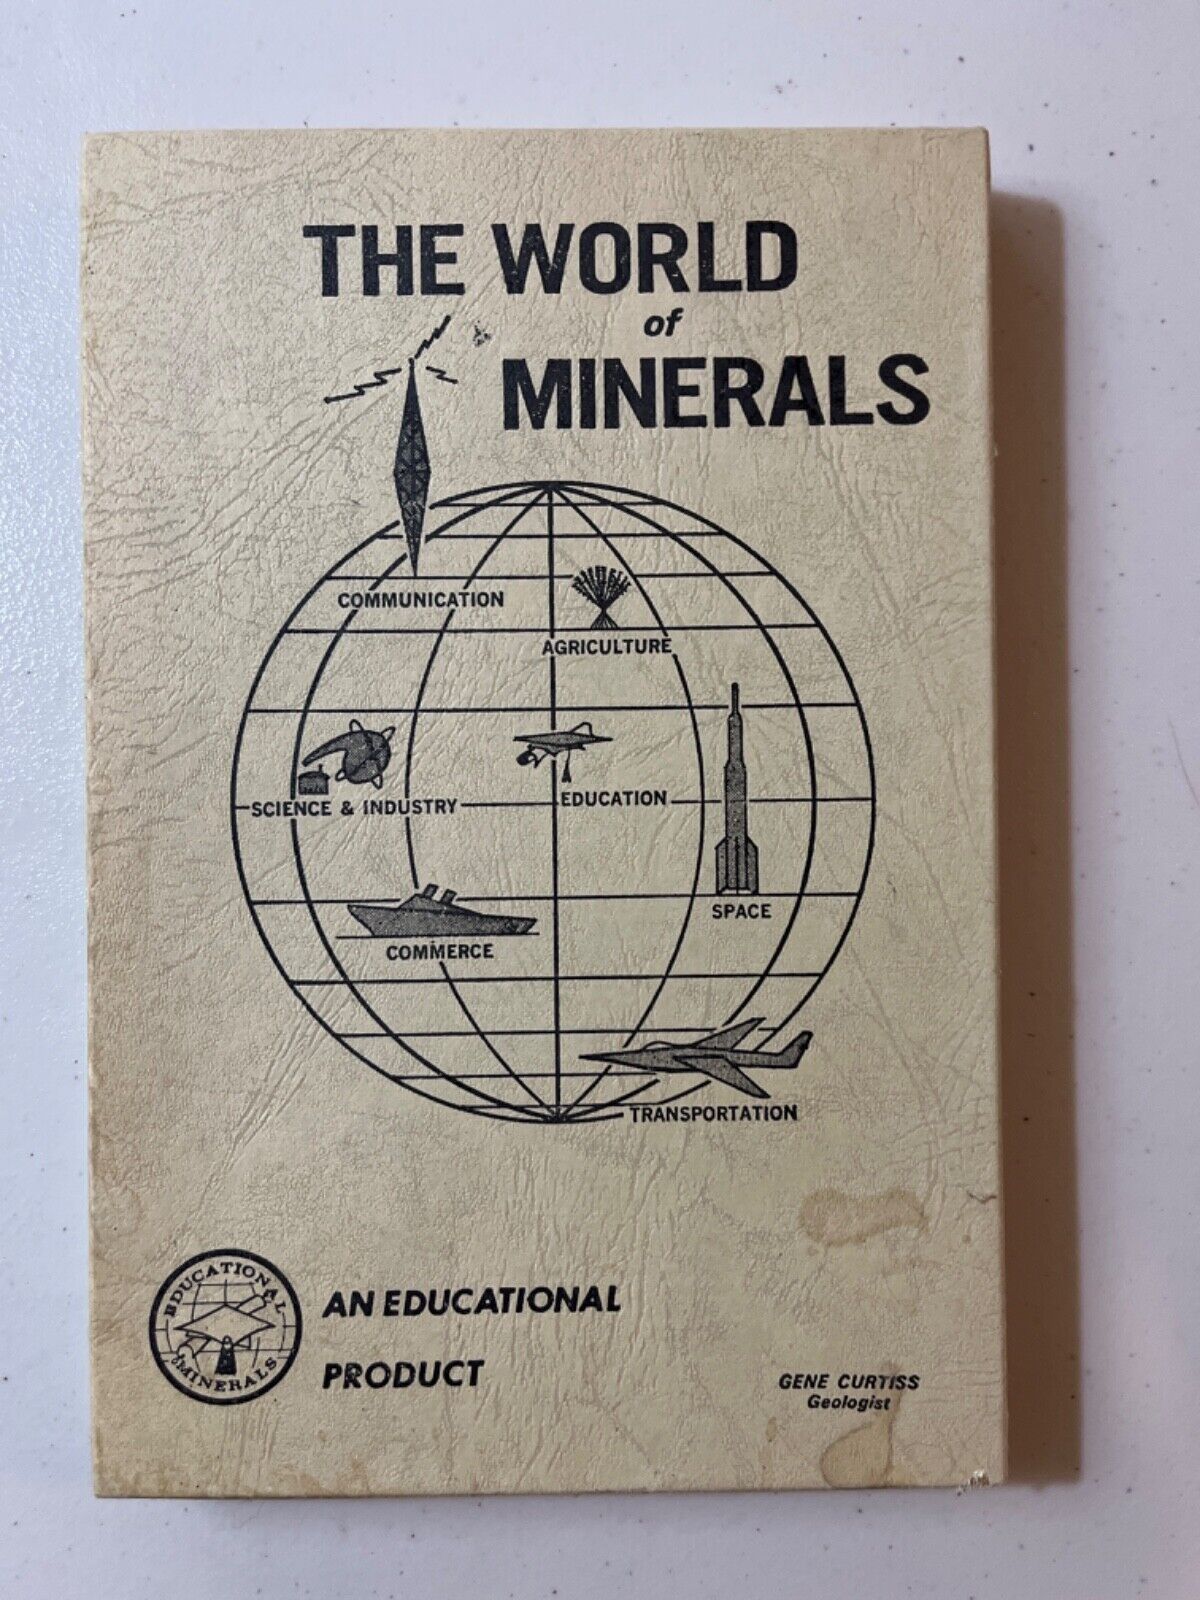 Vintage 1960s “The World of Minerals” ~ Gene Curtiss, Geologist Box